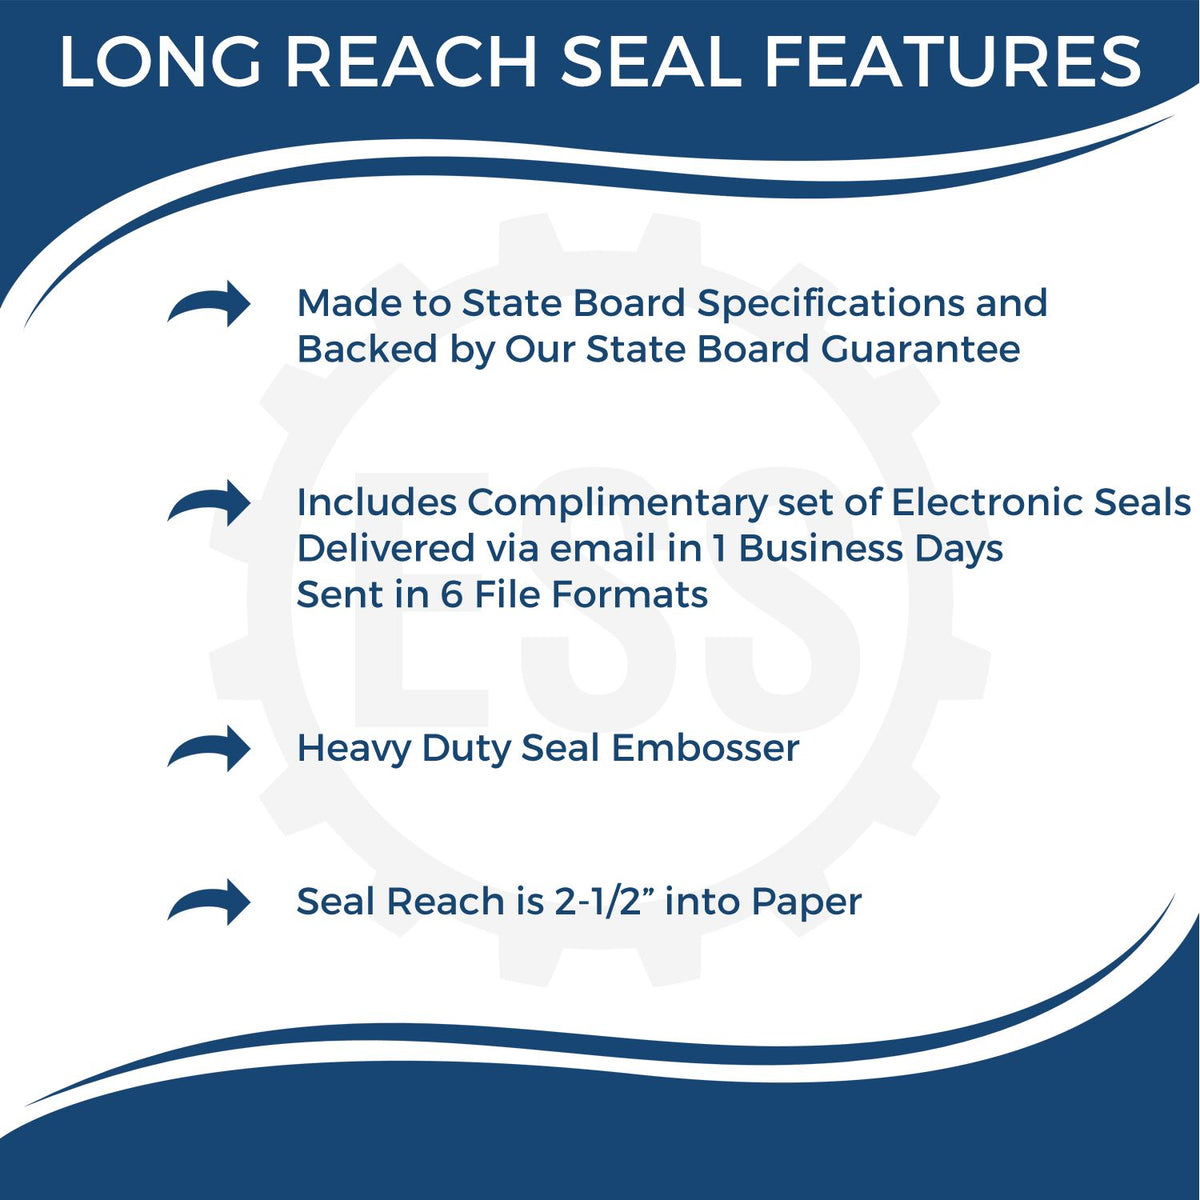 A picture of an infographic highlighting the selling points for the Long Reach Hawaii PE Seal